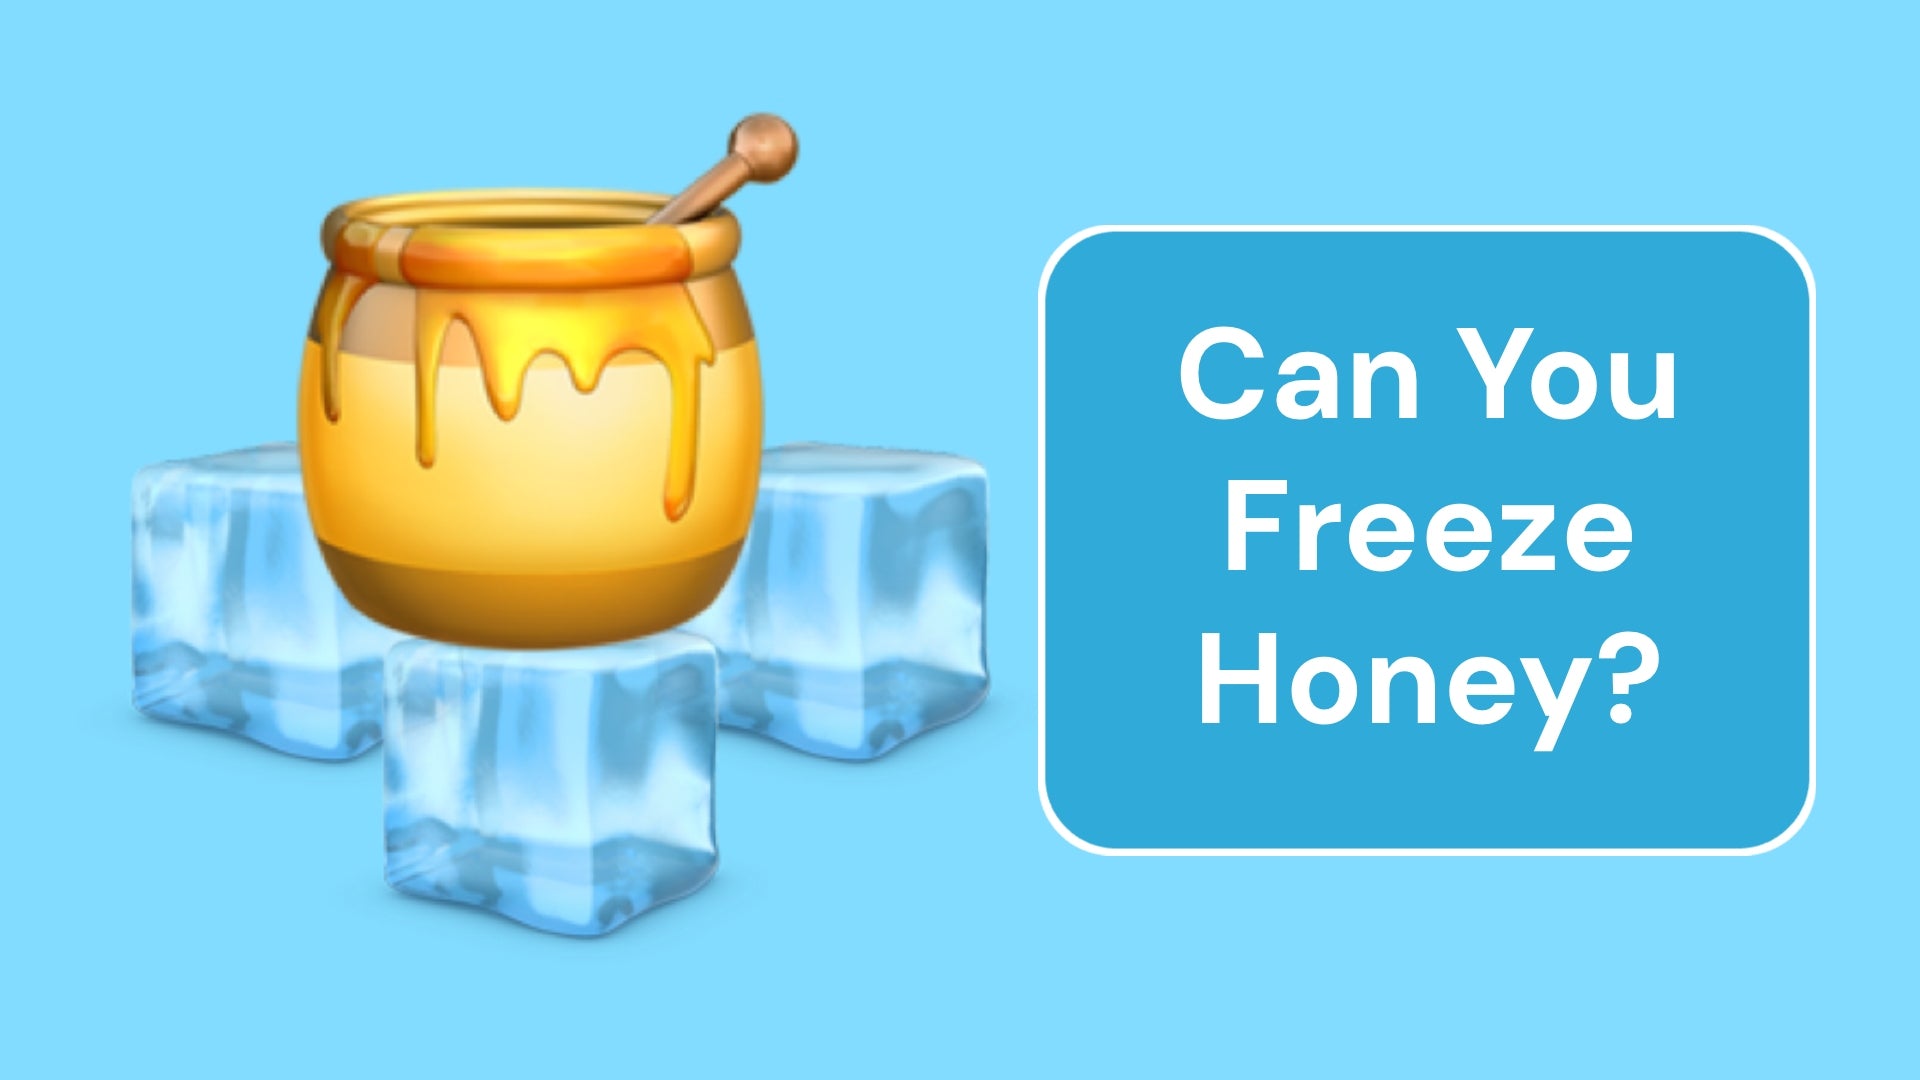 Can You Freeze Honey?